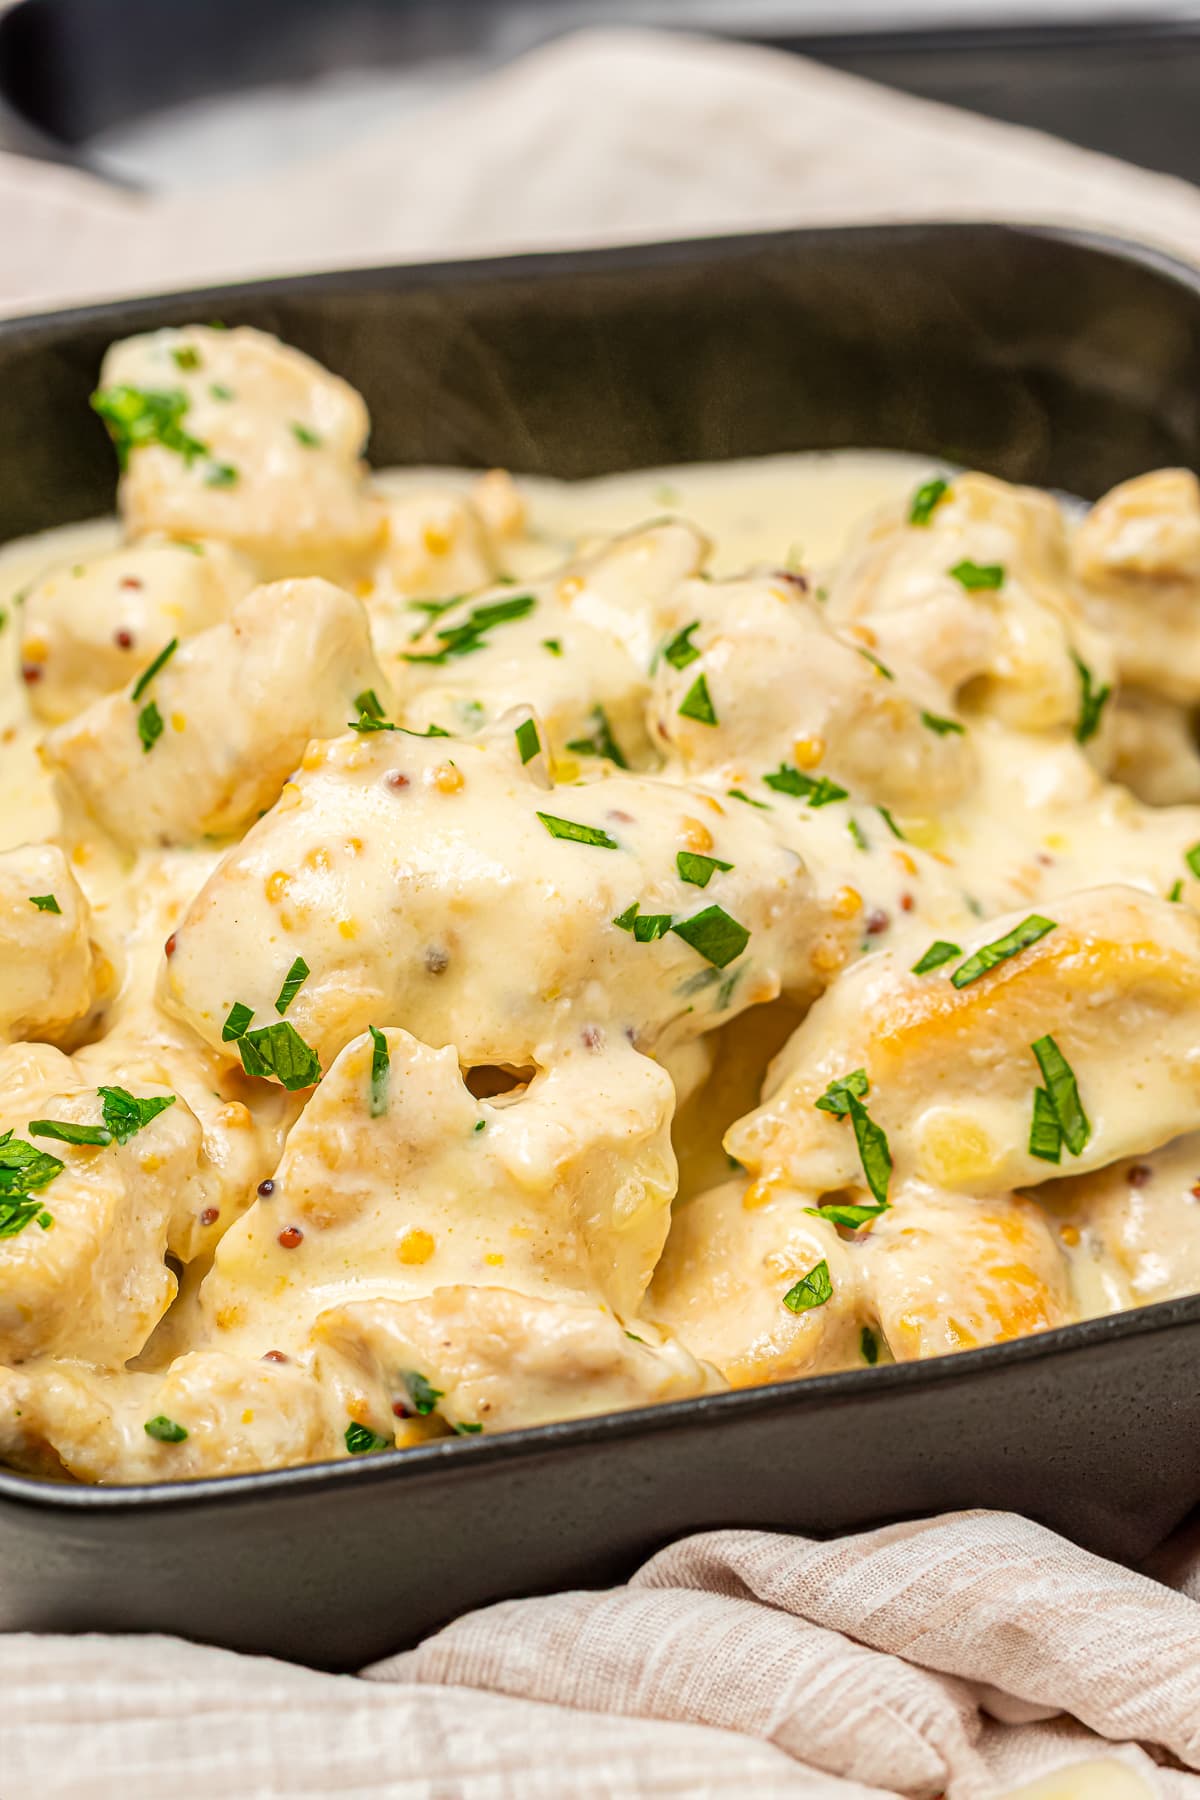 Honey mustard chicken dish presented in a baking tray, ready to be served or further baked, garnished with parsley on top.